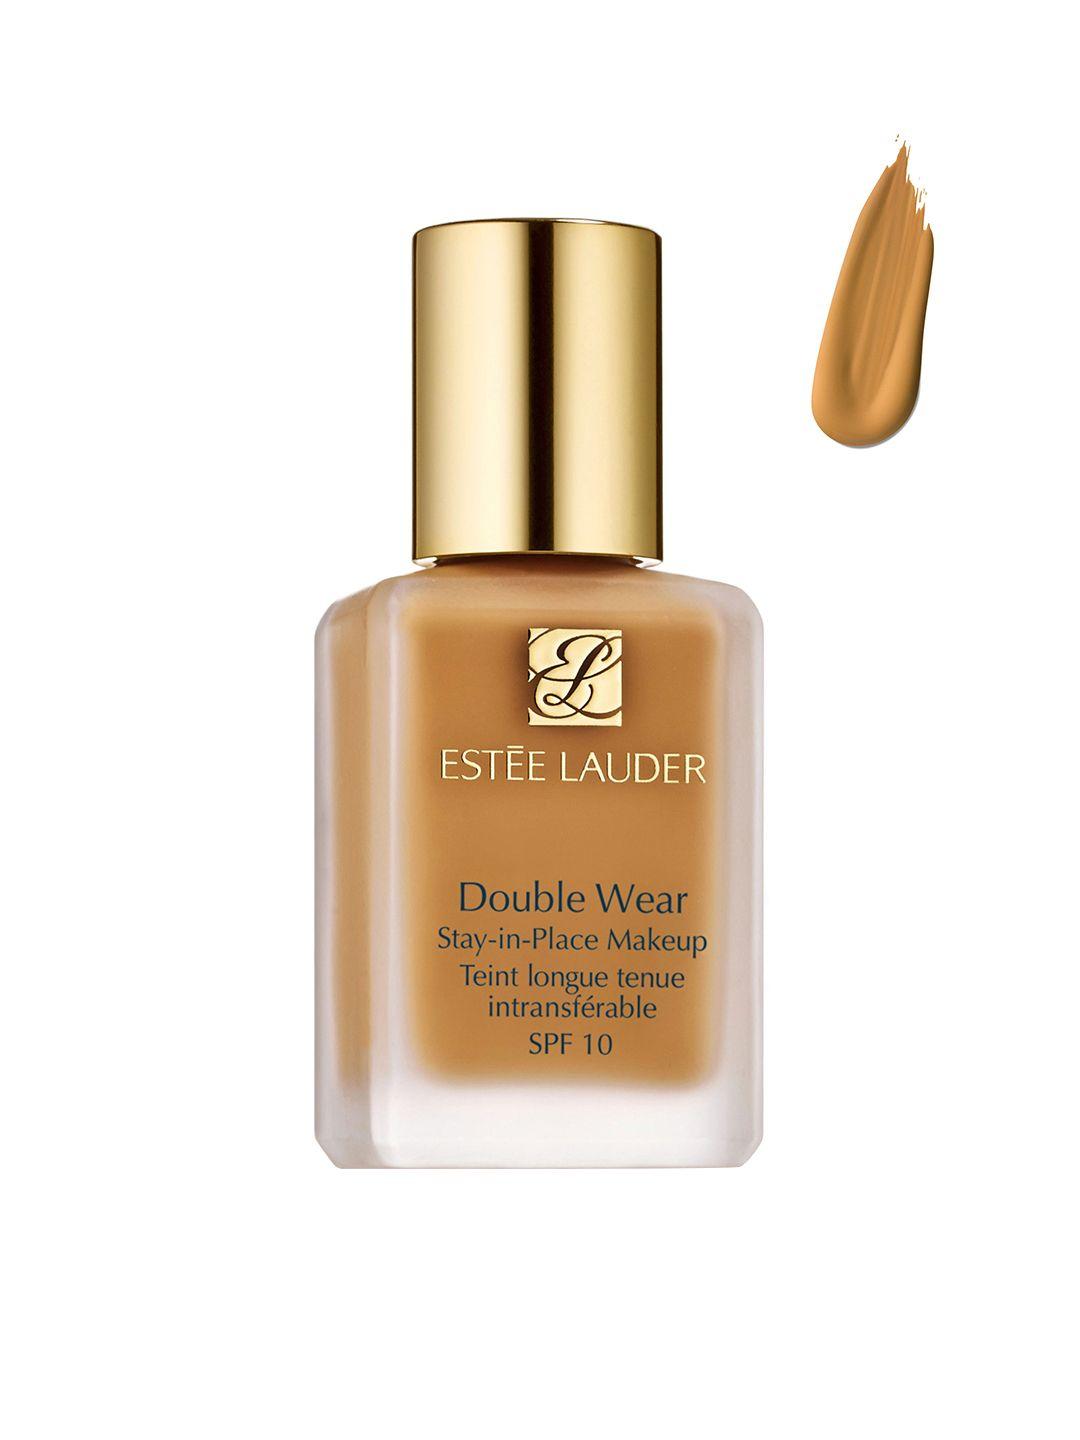 estee-lauder-double-wear-stay-in-place-makeup-spf-10-foundation---honey-bronze-30-ml